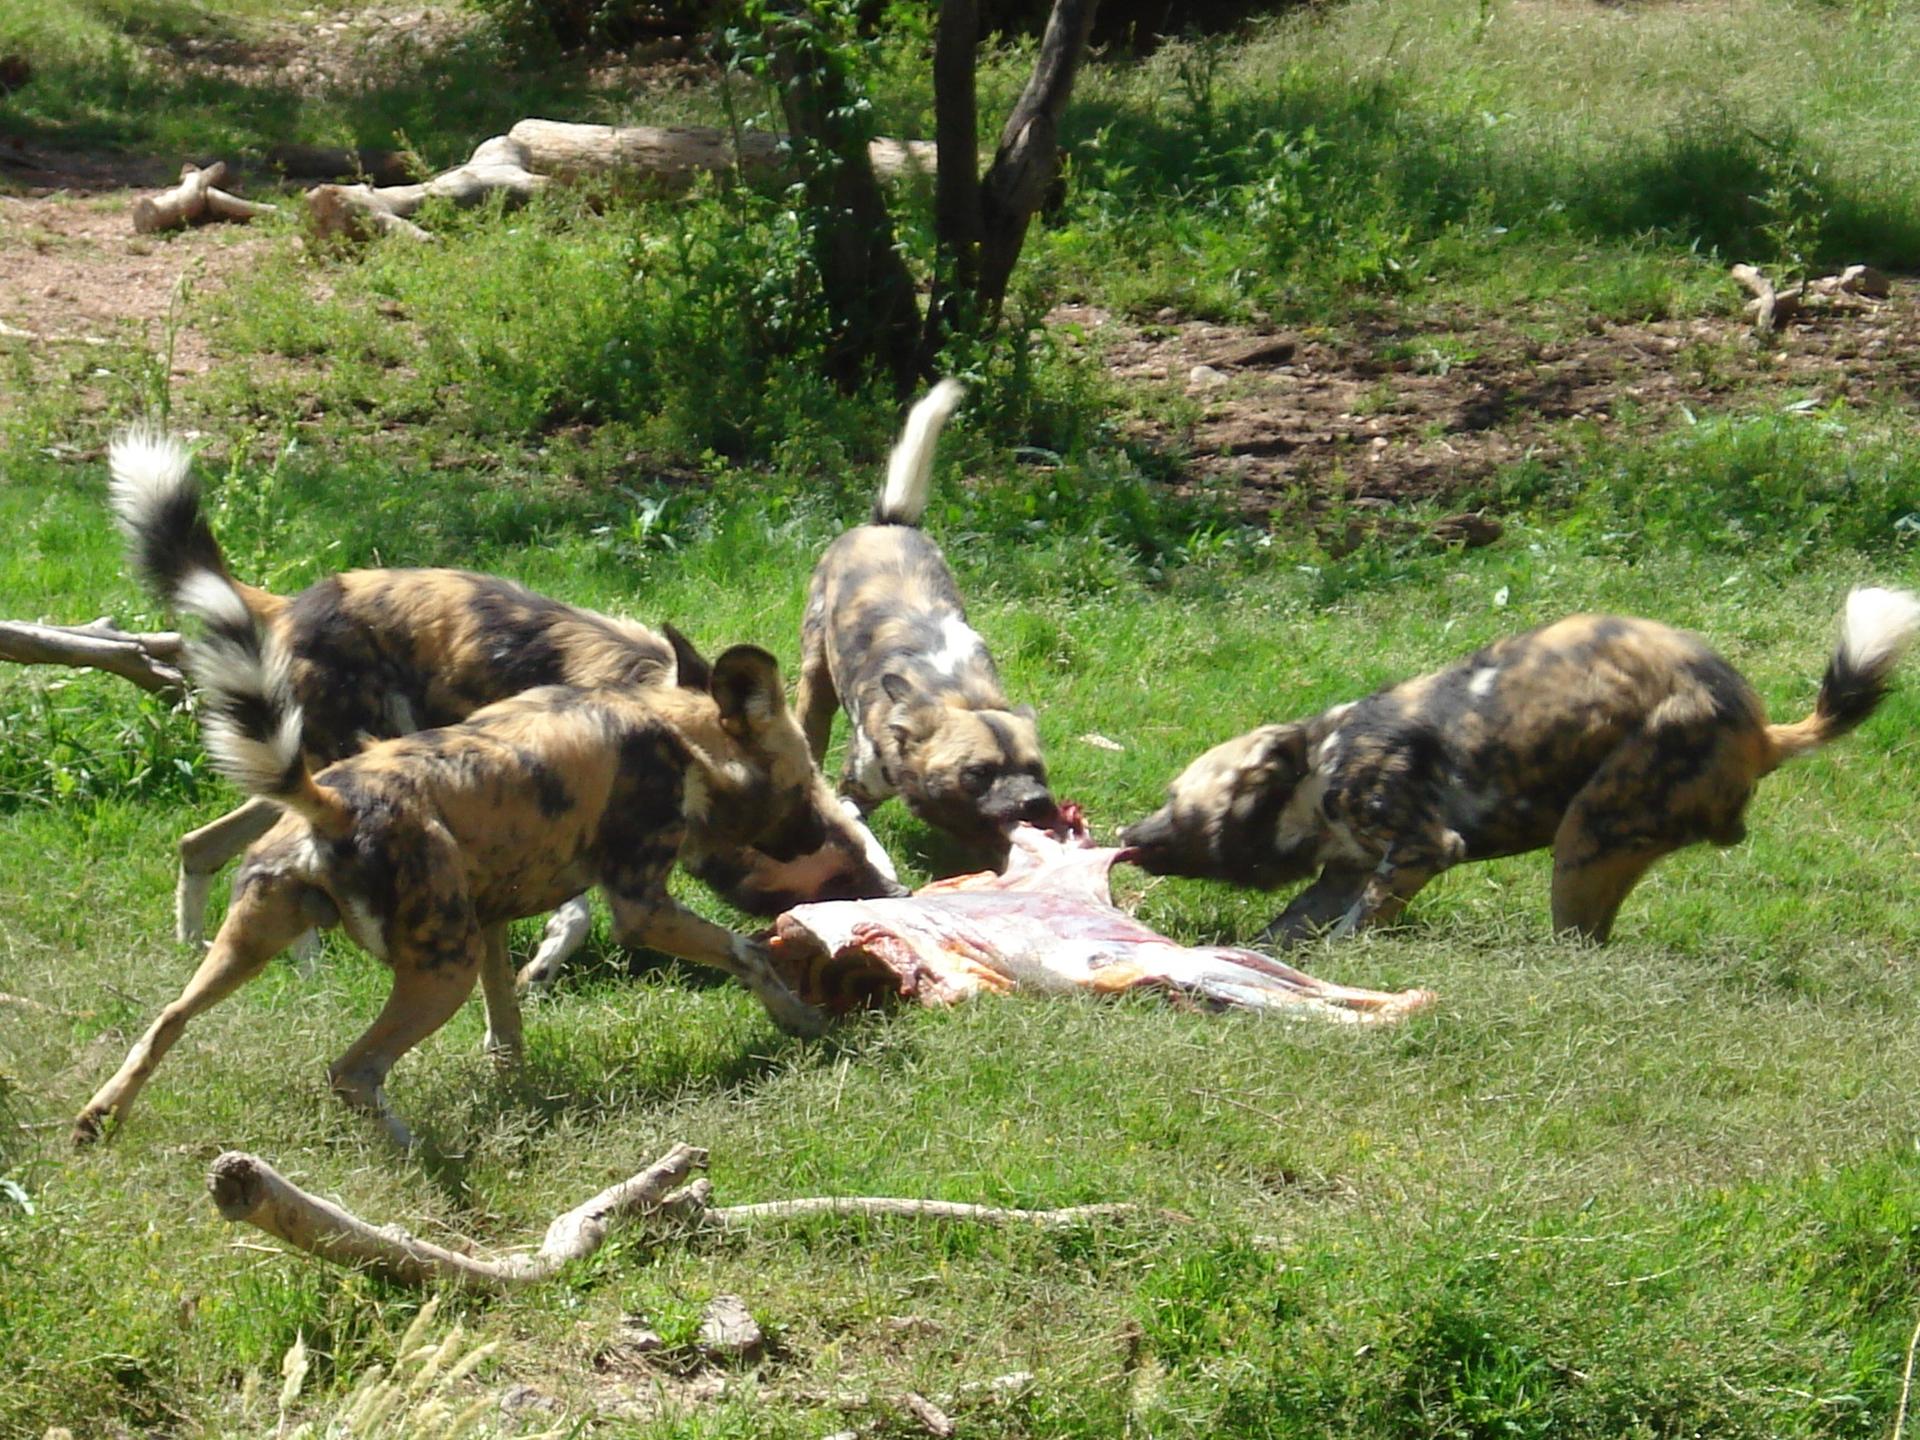 Painted dogs tearing apart a carcass. Behavioral enrichment is about giving animals in zoos opportunities that bring out natural behaviors, says Hilda Tresz.